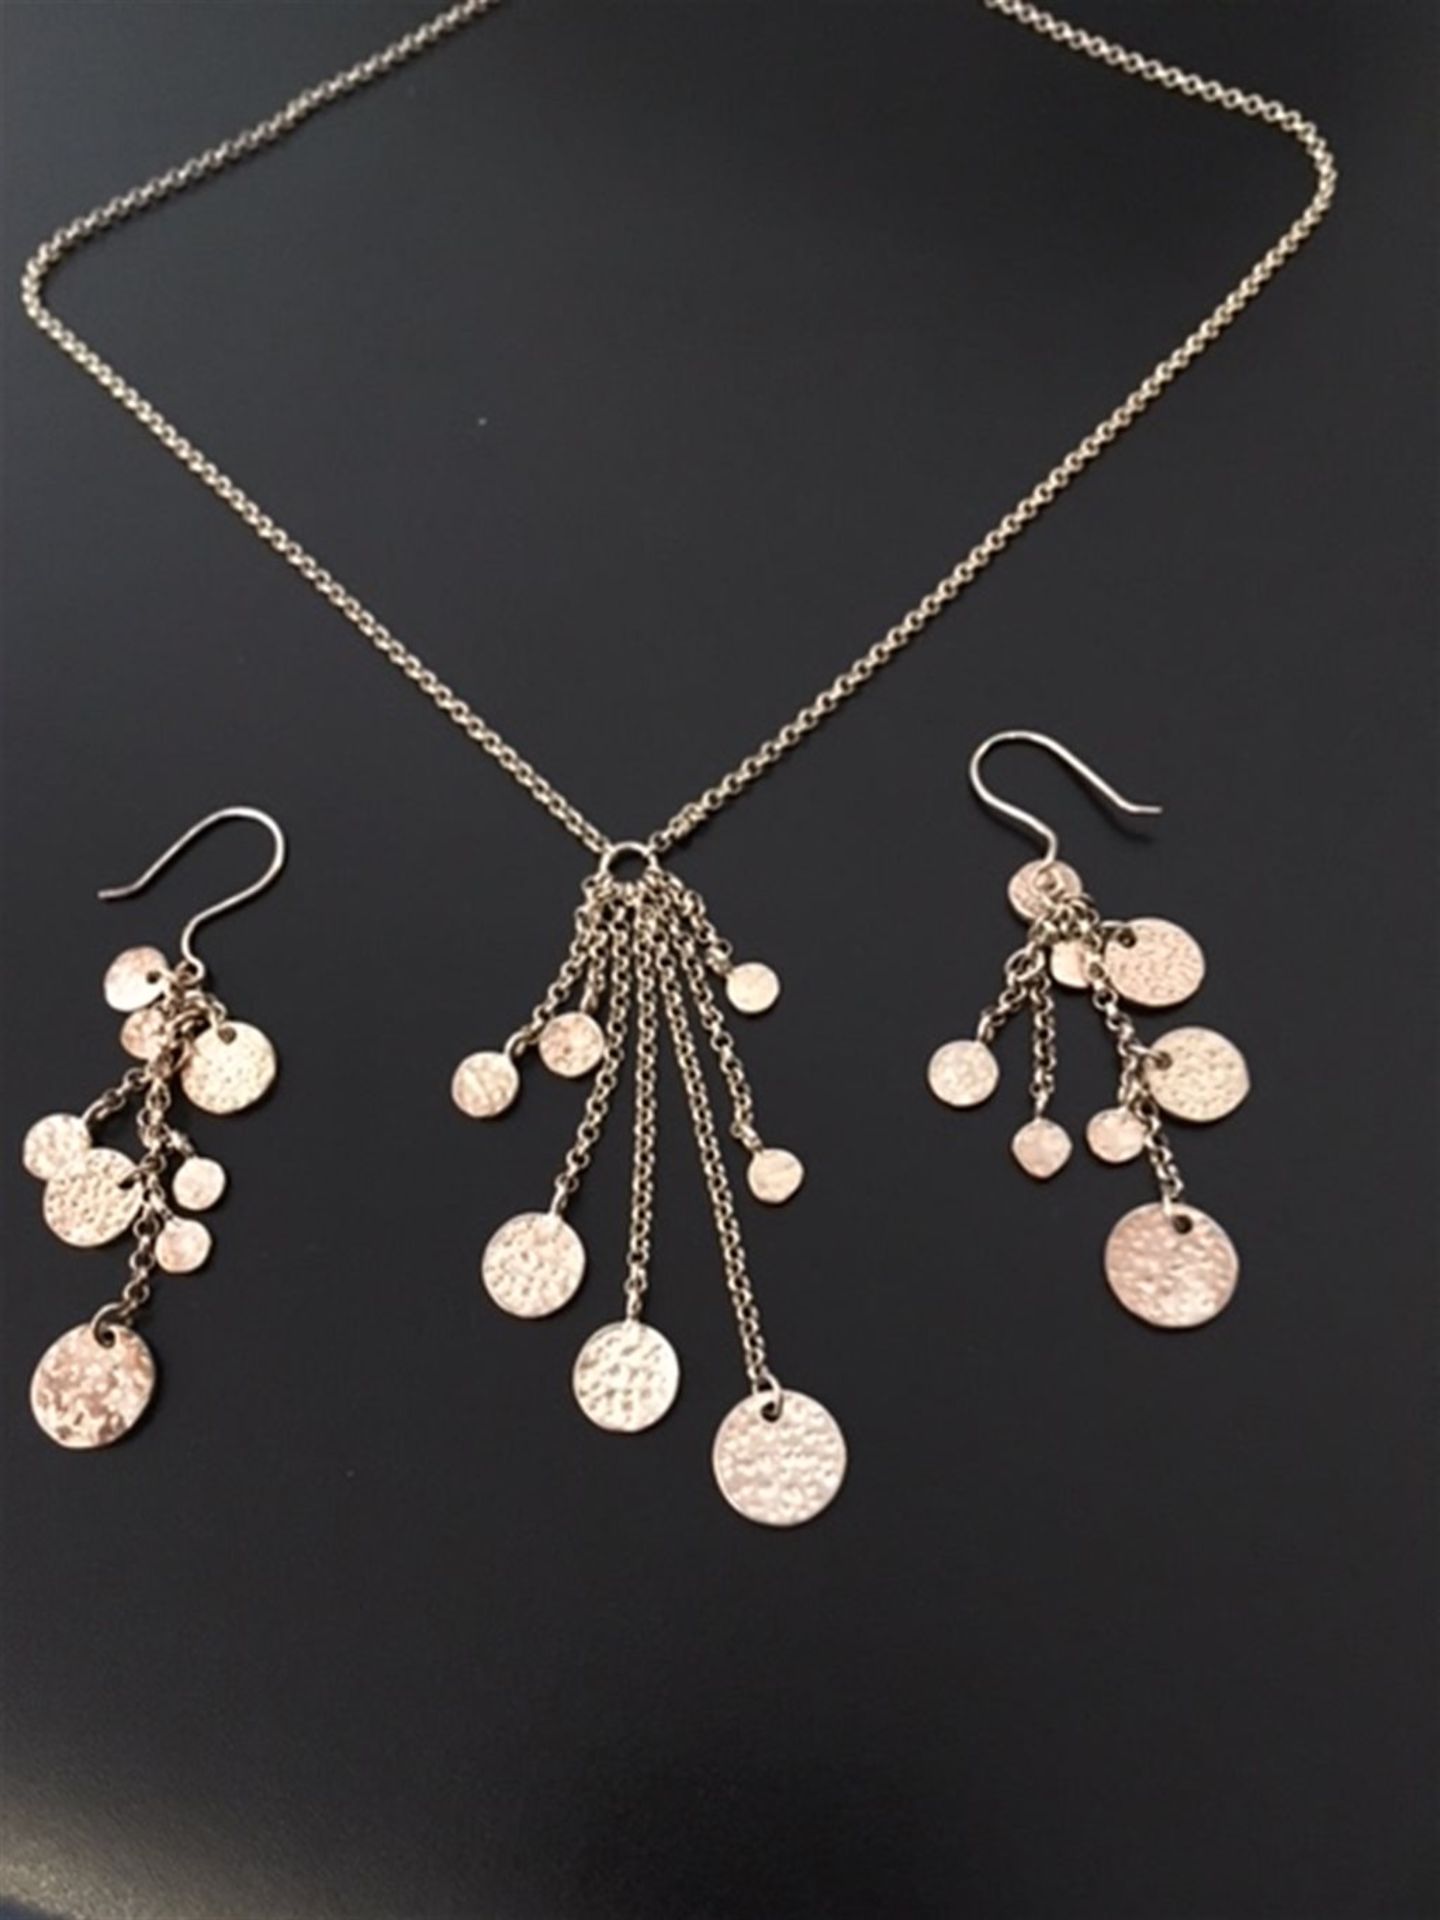 Silver pendant and matching earrings